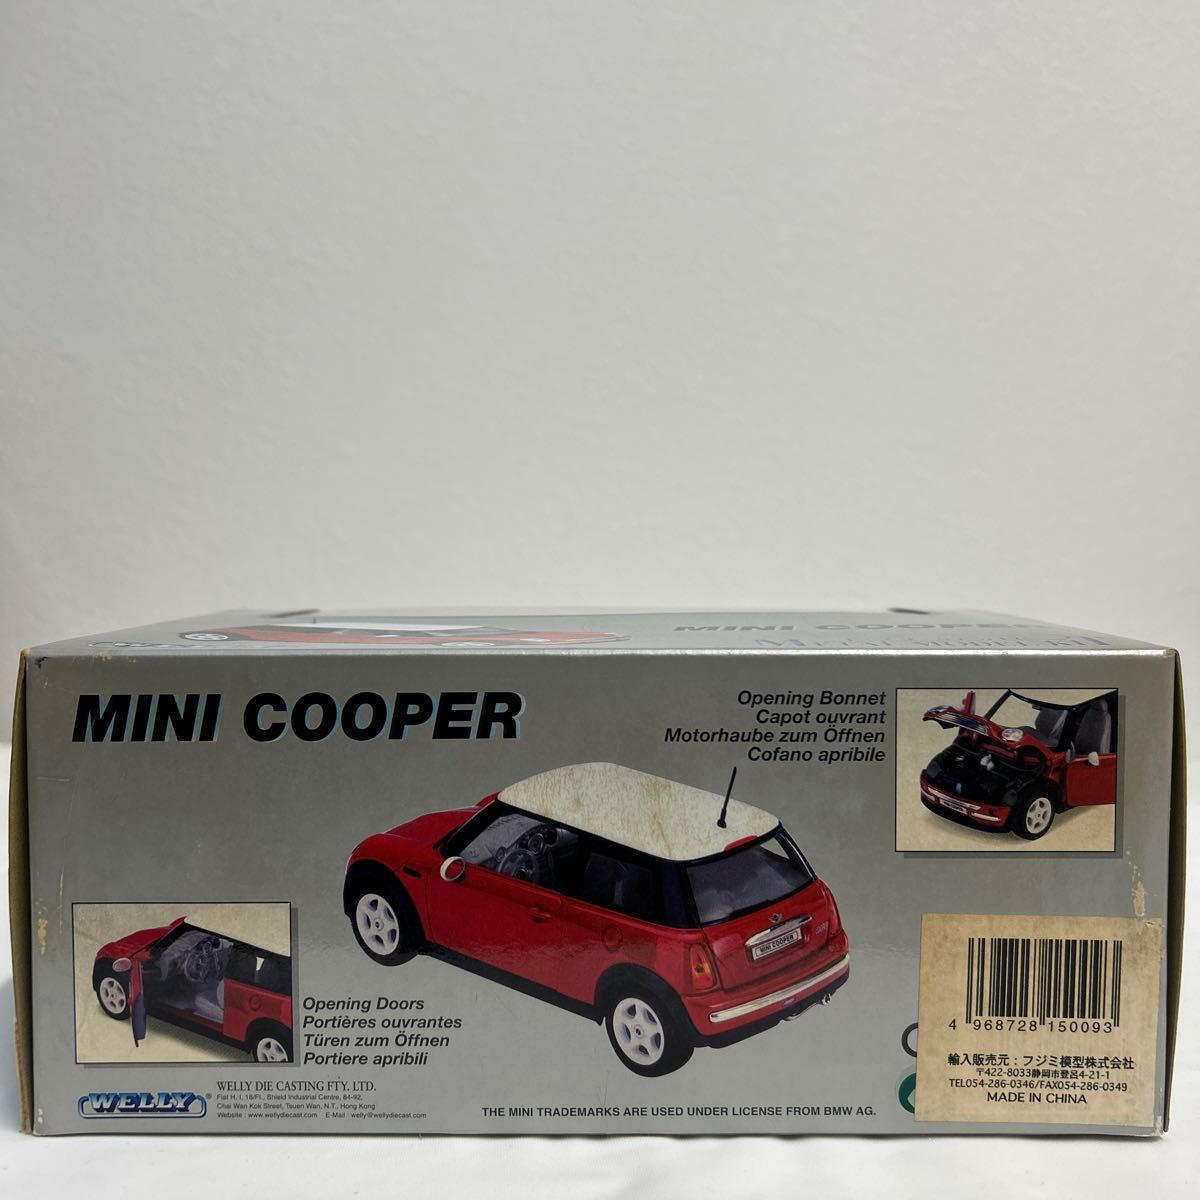  not yet constructed WELLY 1/24 MINI COOPER Red Fujimi model Mini Cooper metal model kit minicar model car BMW R50